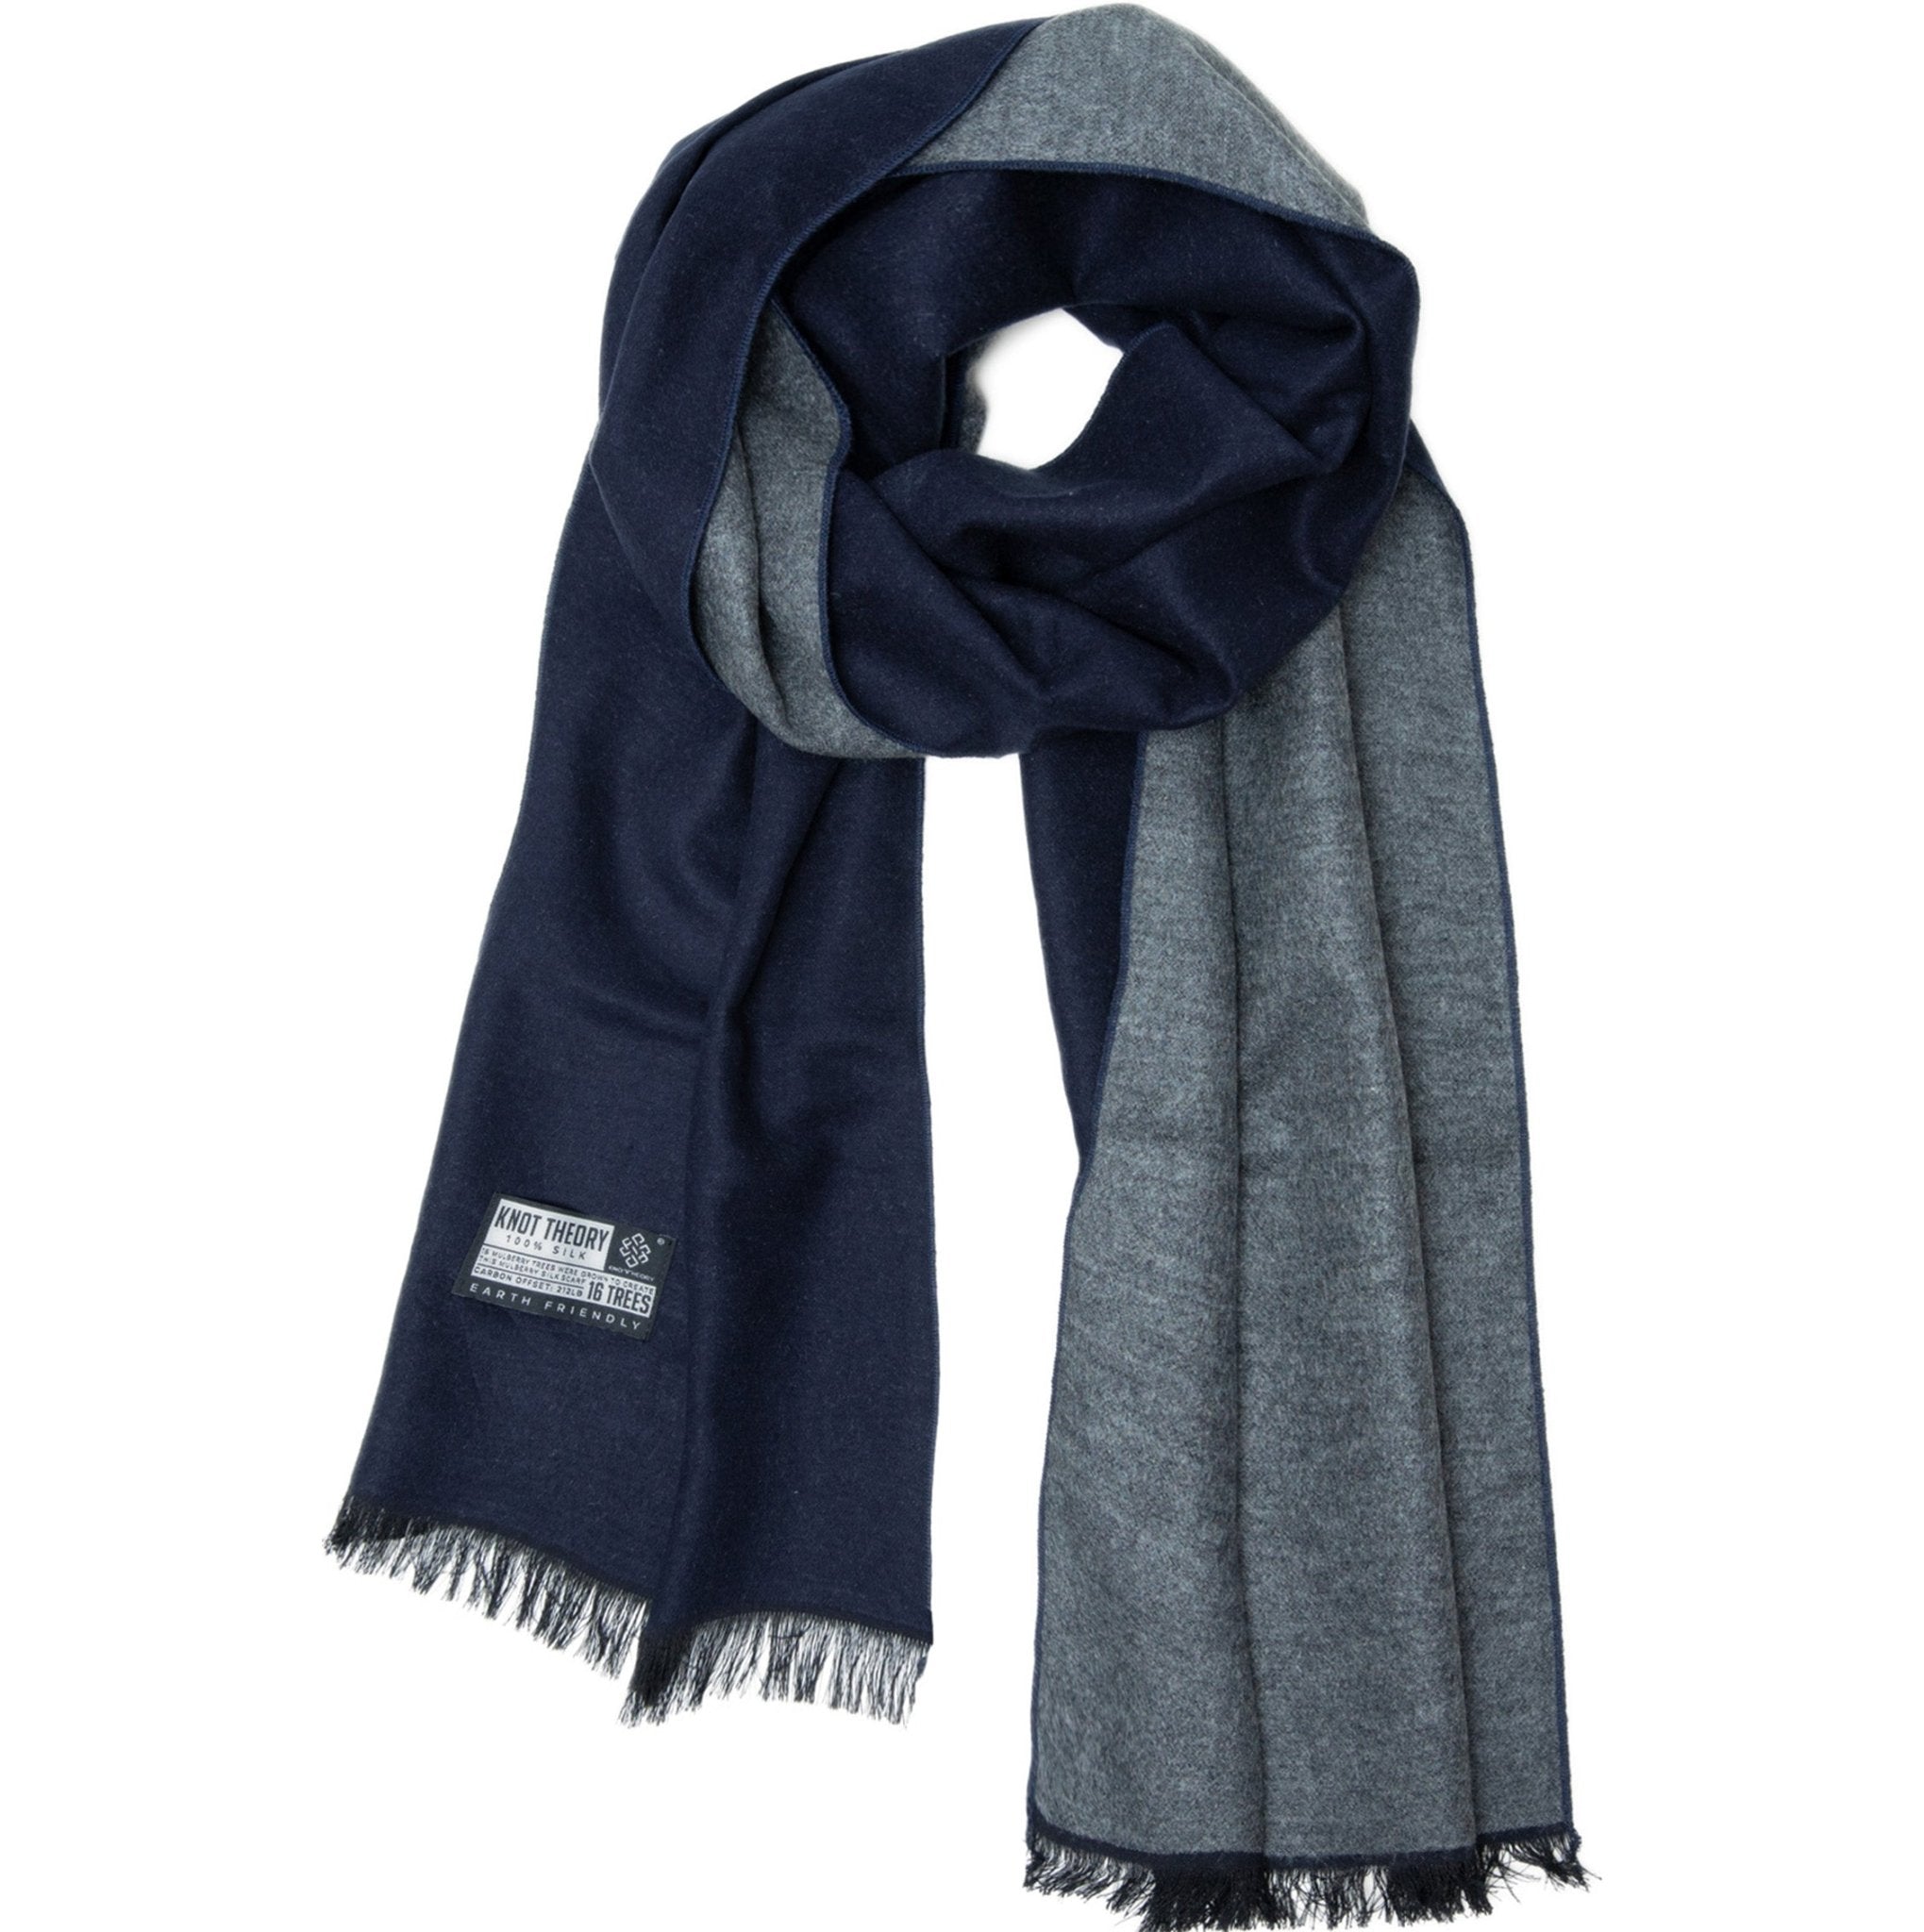 Blue Grey Eco Silk Scarf - Softer than Cashmere 100% Silk - Knot Theory